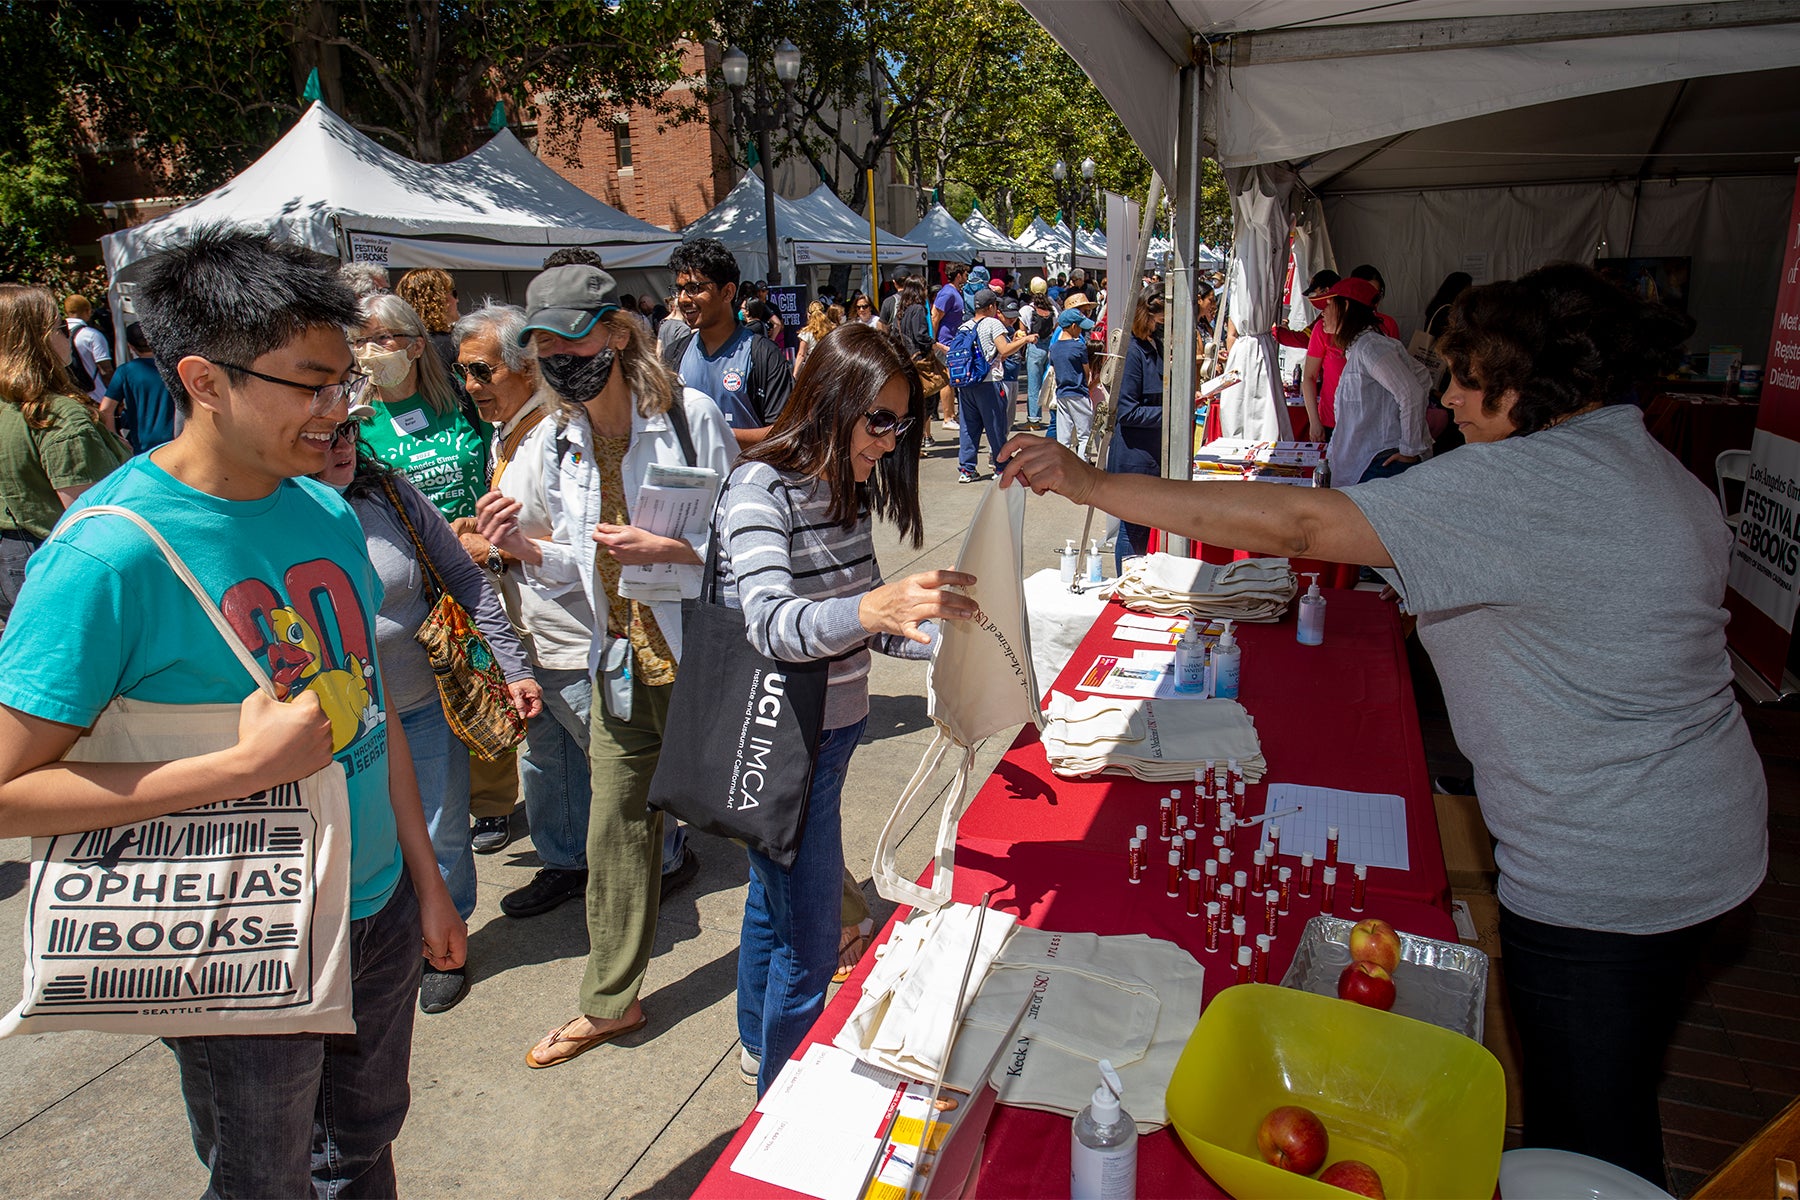 2022 Los Angeles Times Festival of Books at USC: people taking pamphlets